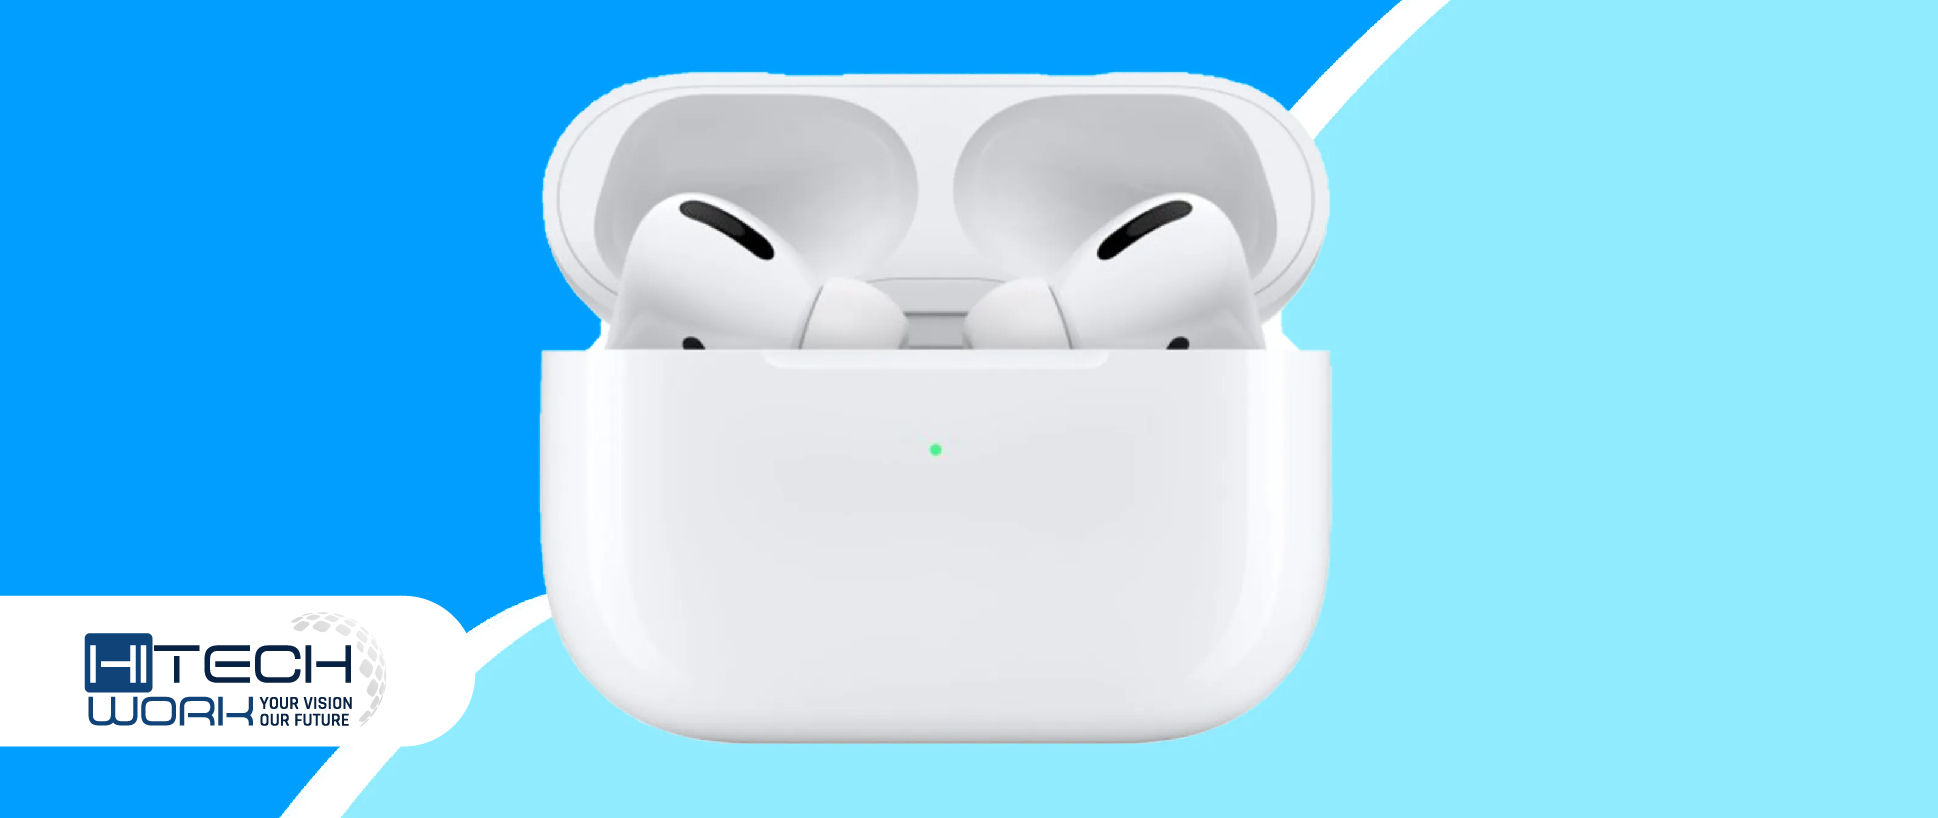 Apple's Latest AirPods Pro Reach All-Time